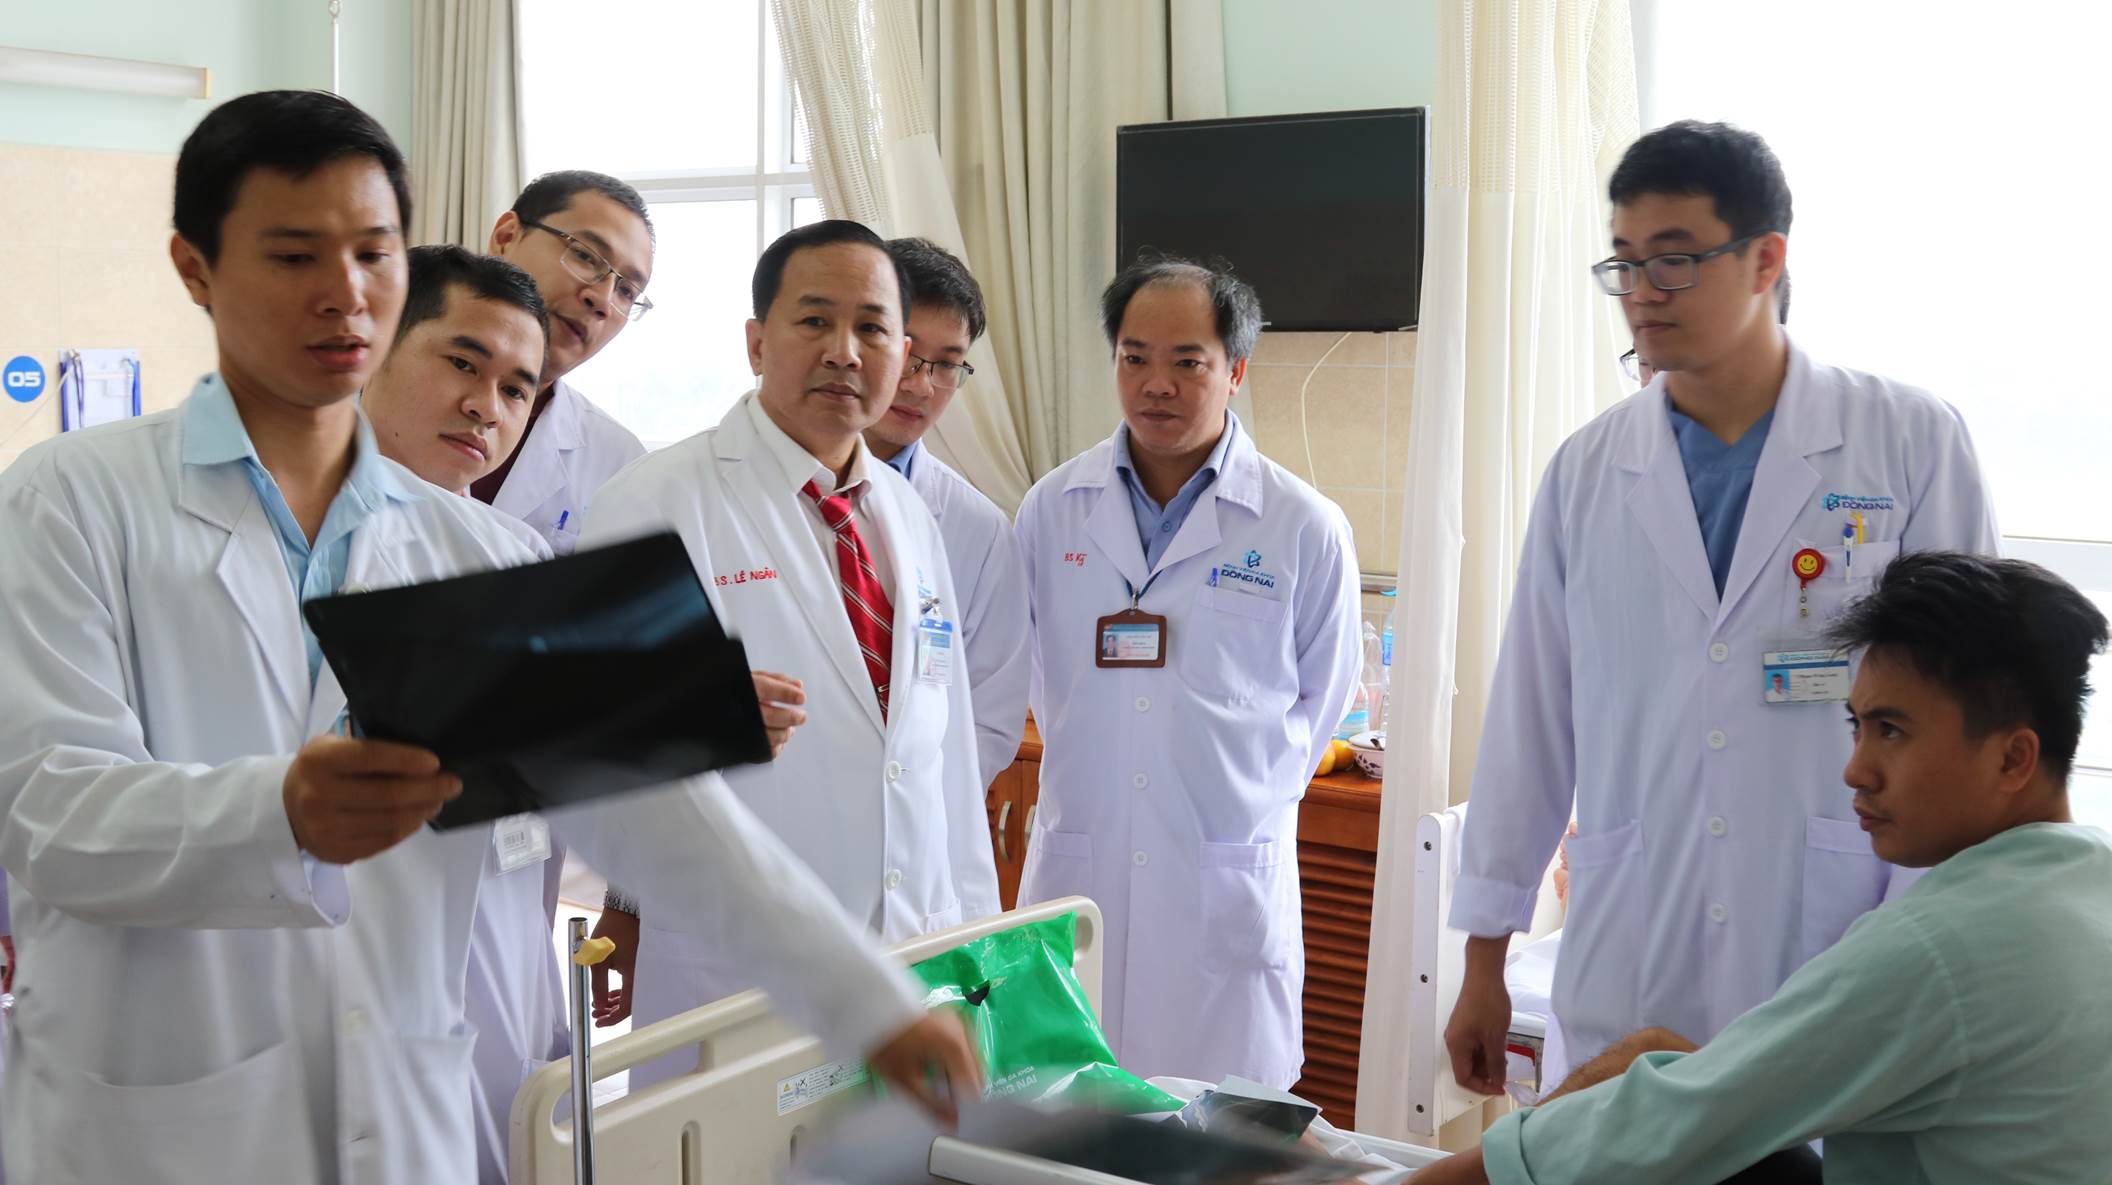 A group of doctors standing around a patient
Description automatically generated with medium confidence